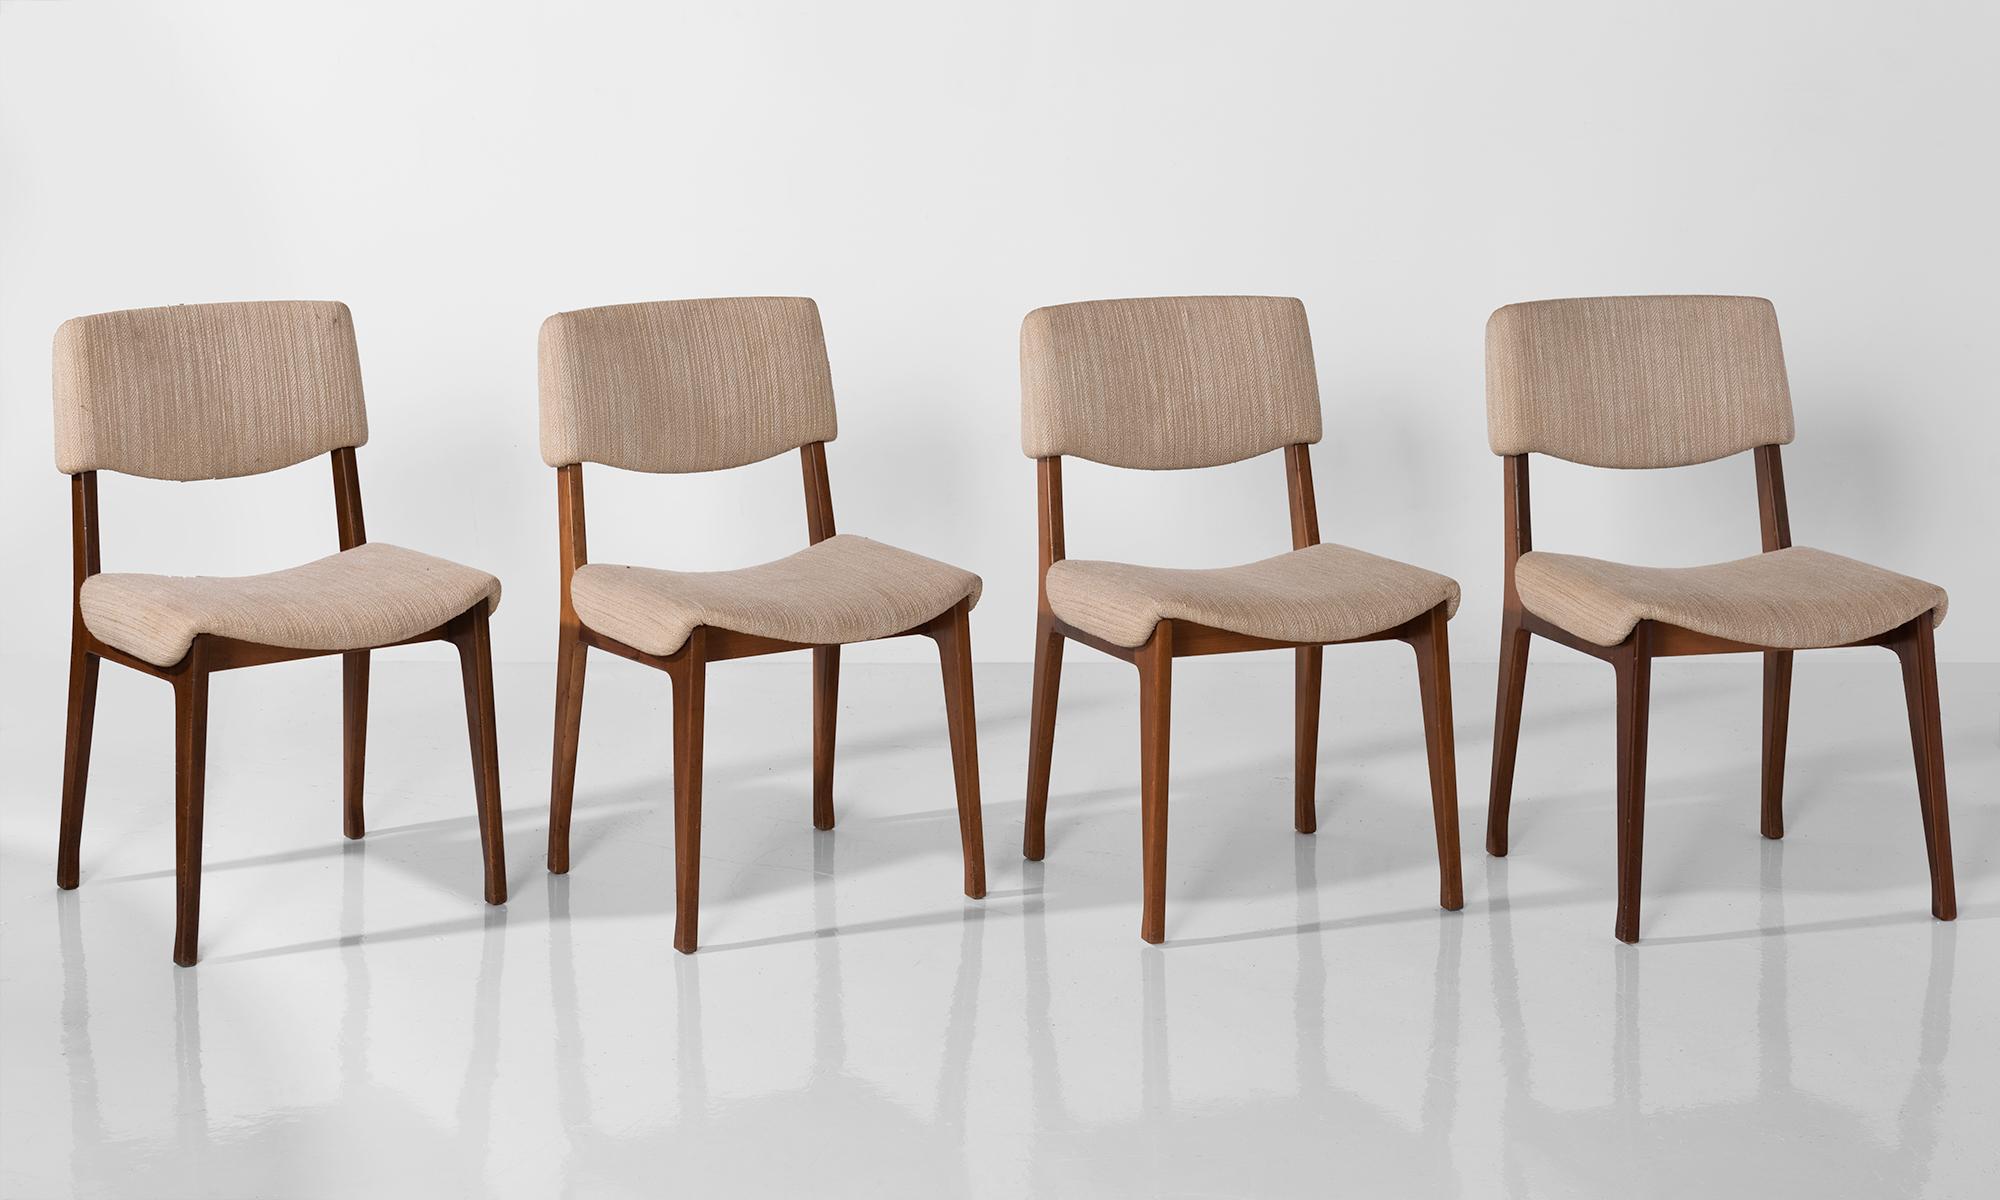 Set of (4) modern dining chairs by M.I.M., Italy, circa 1960.

Classic modern forms include original upholstery.